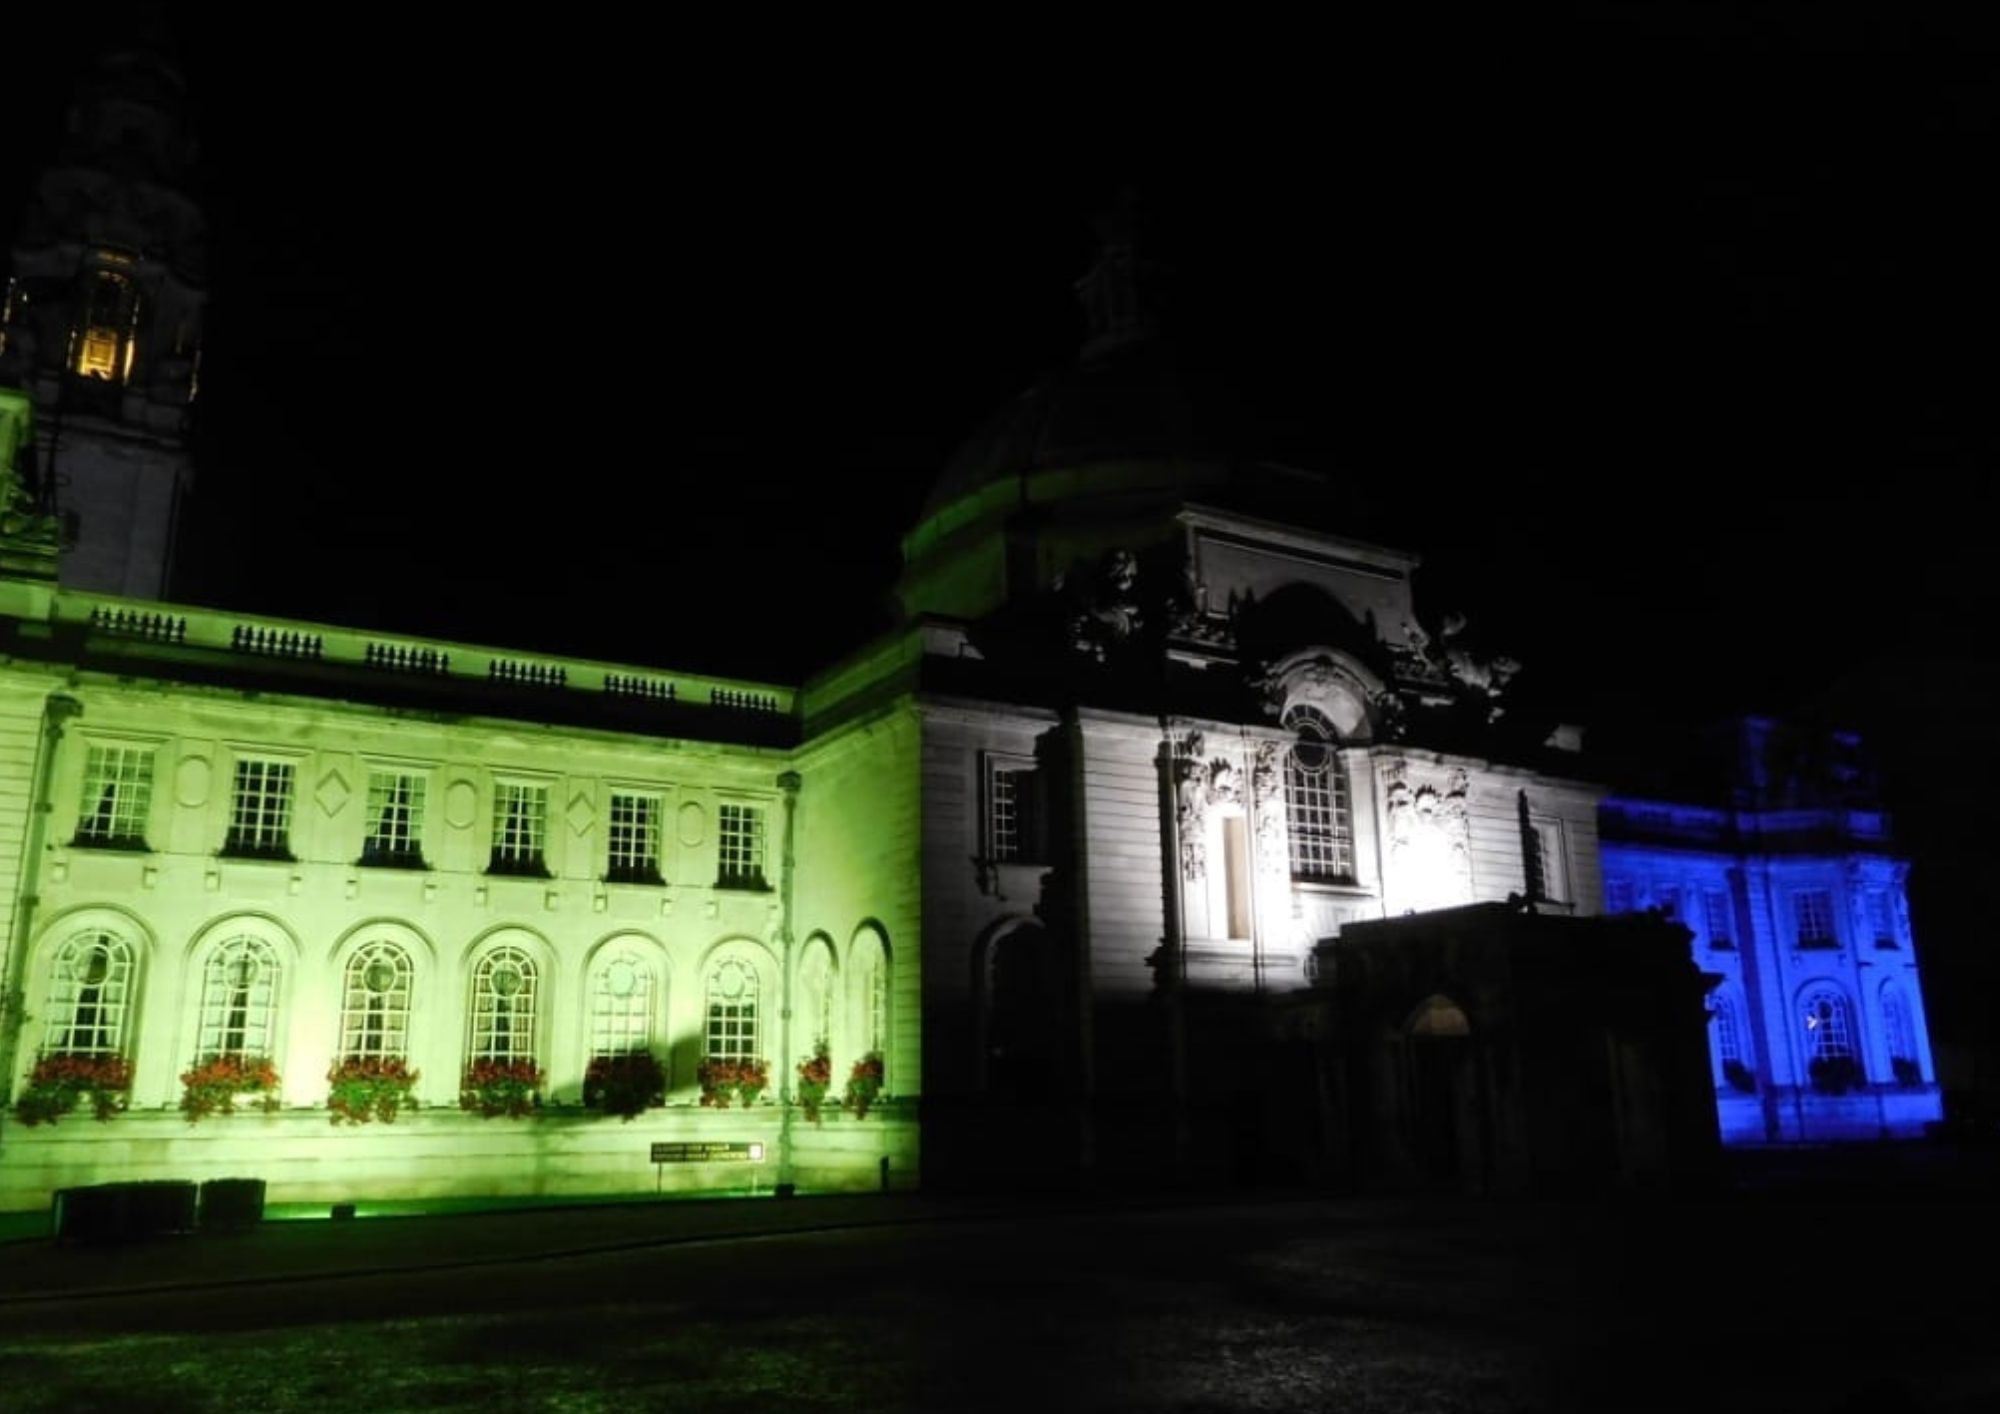 Cardiff City Hall lit up green and blue